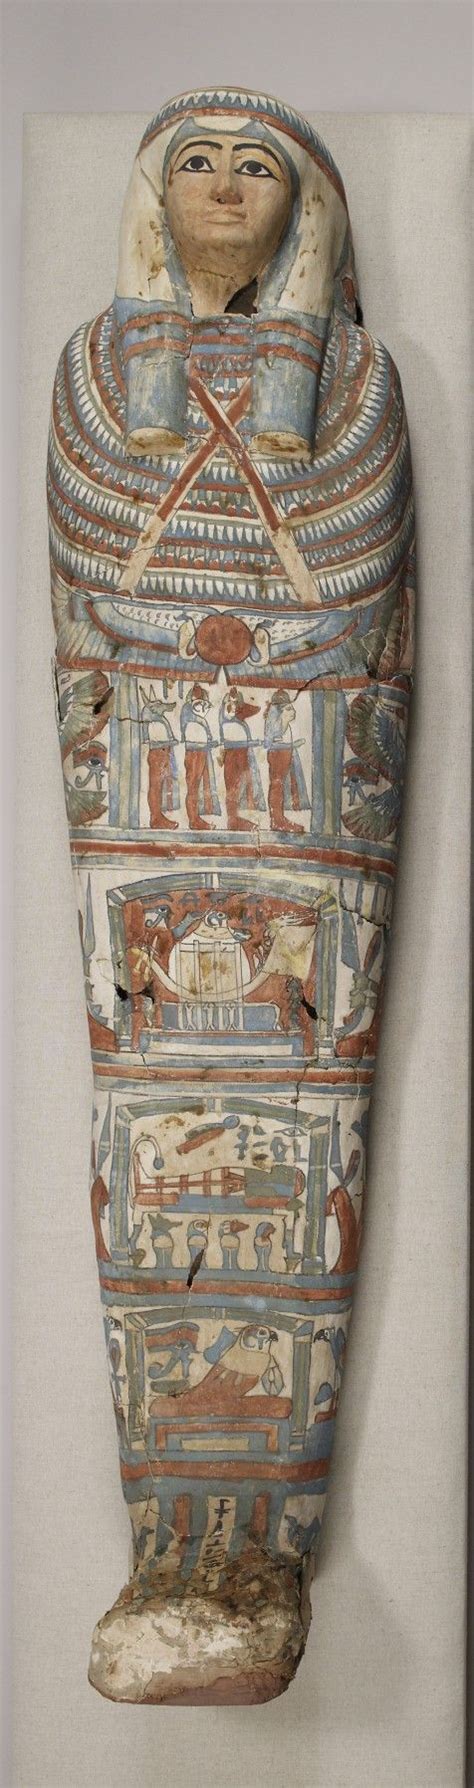 Mummy And Painted Cartonnage Of An Unknown Woman · The Walters Art Museum · Works Of Art